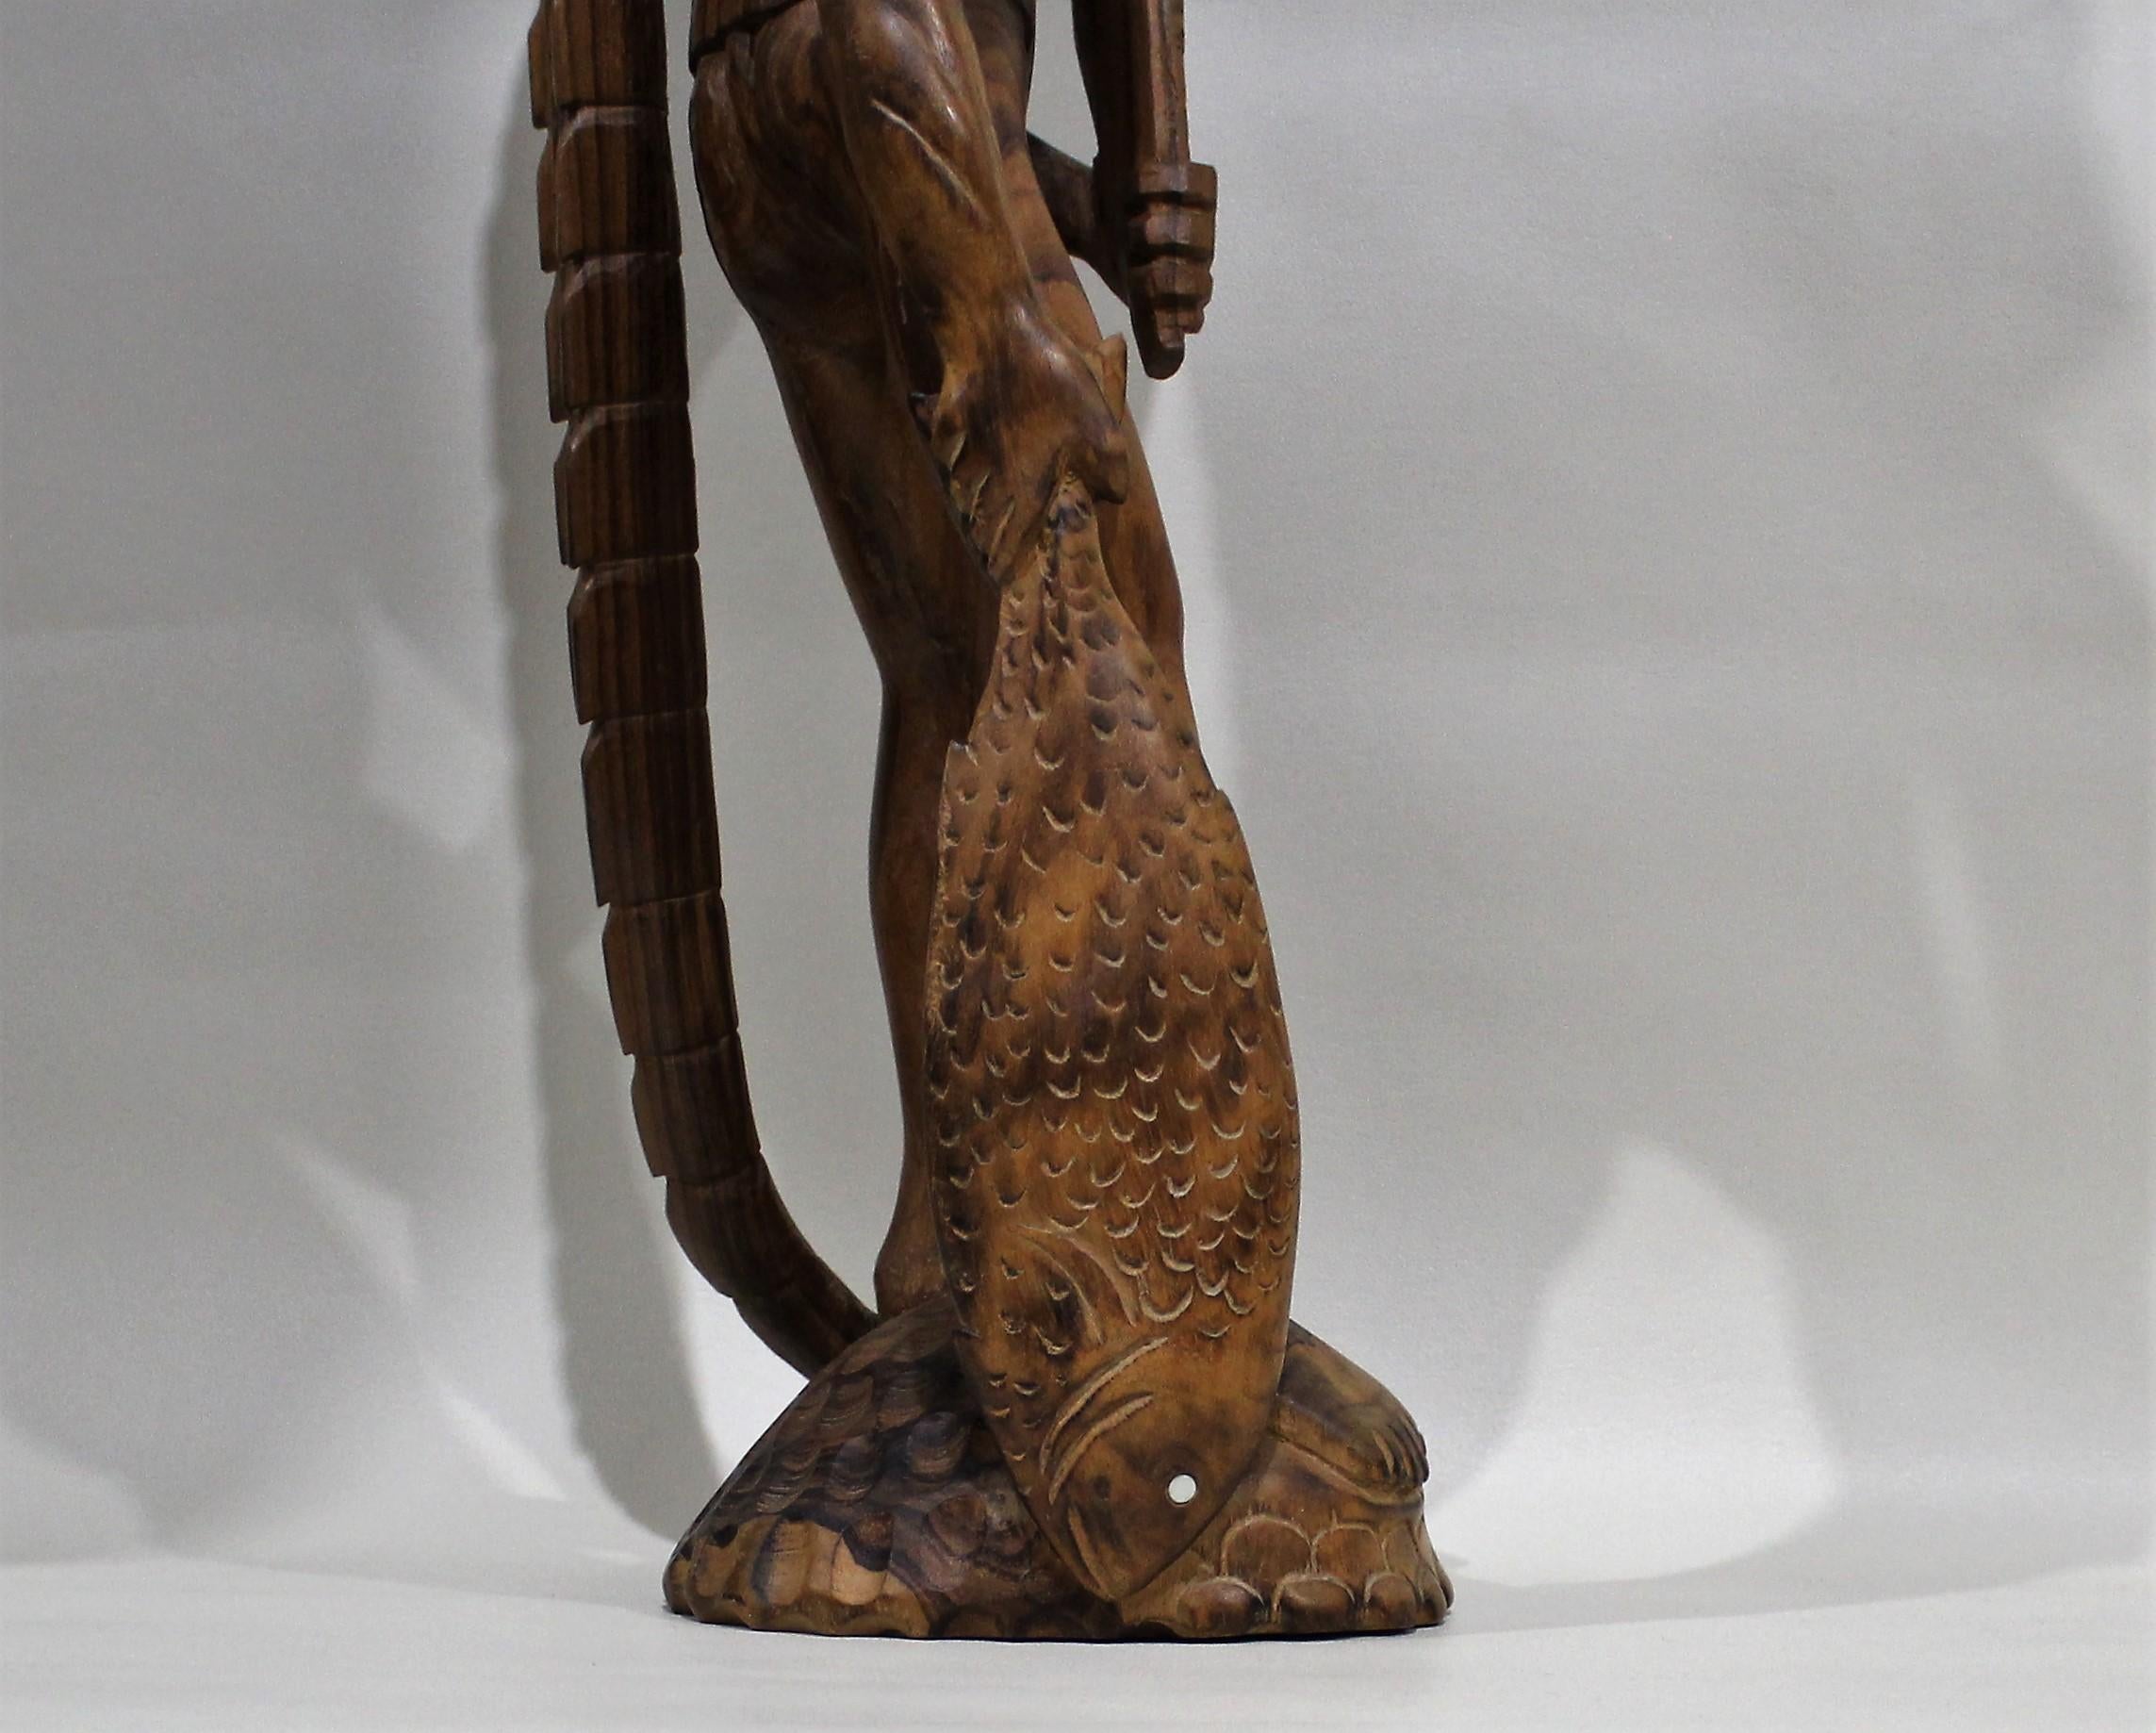 Maori Hand Carved Tribal Sculpture of Hunter In Good Condition For Sale In Hamilton, Ontario